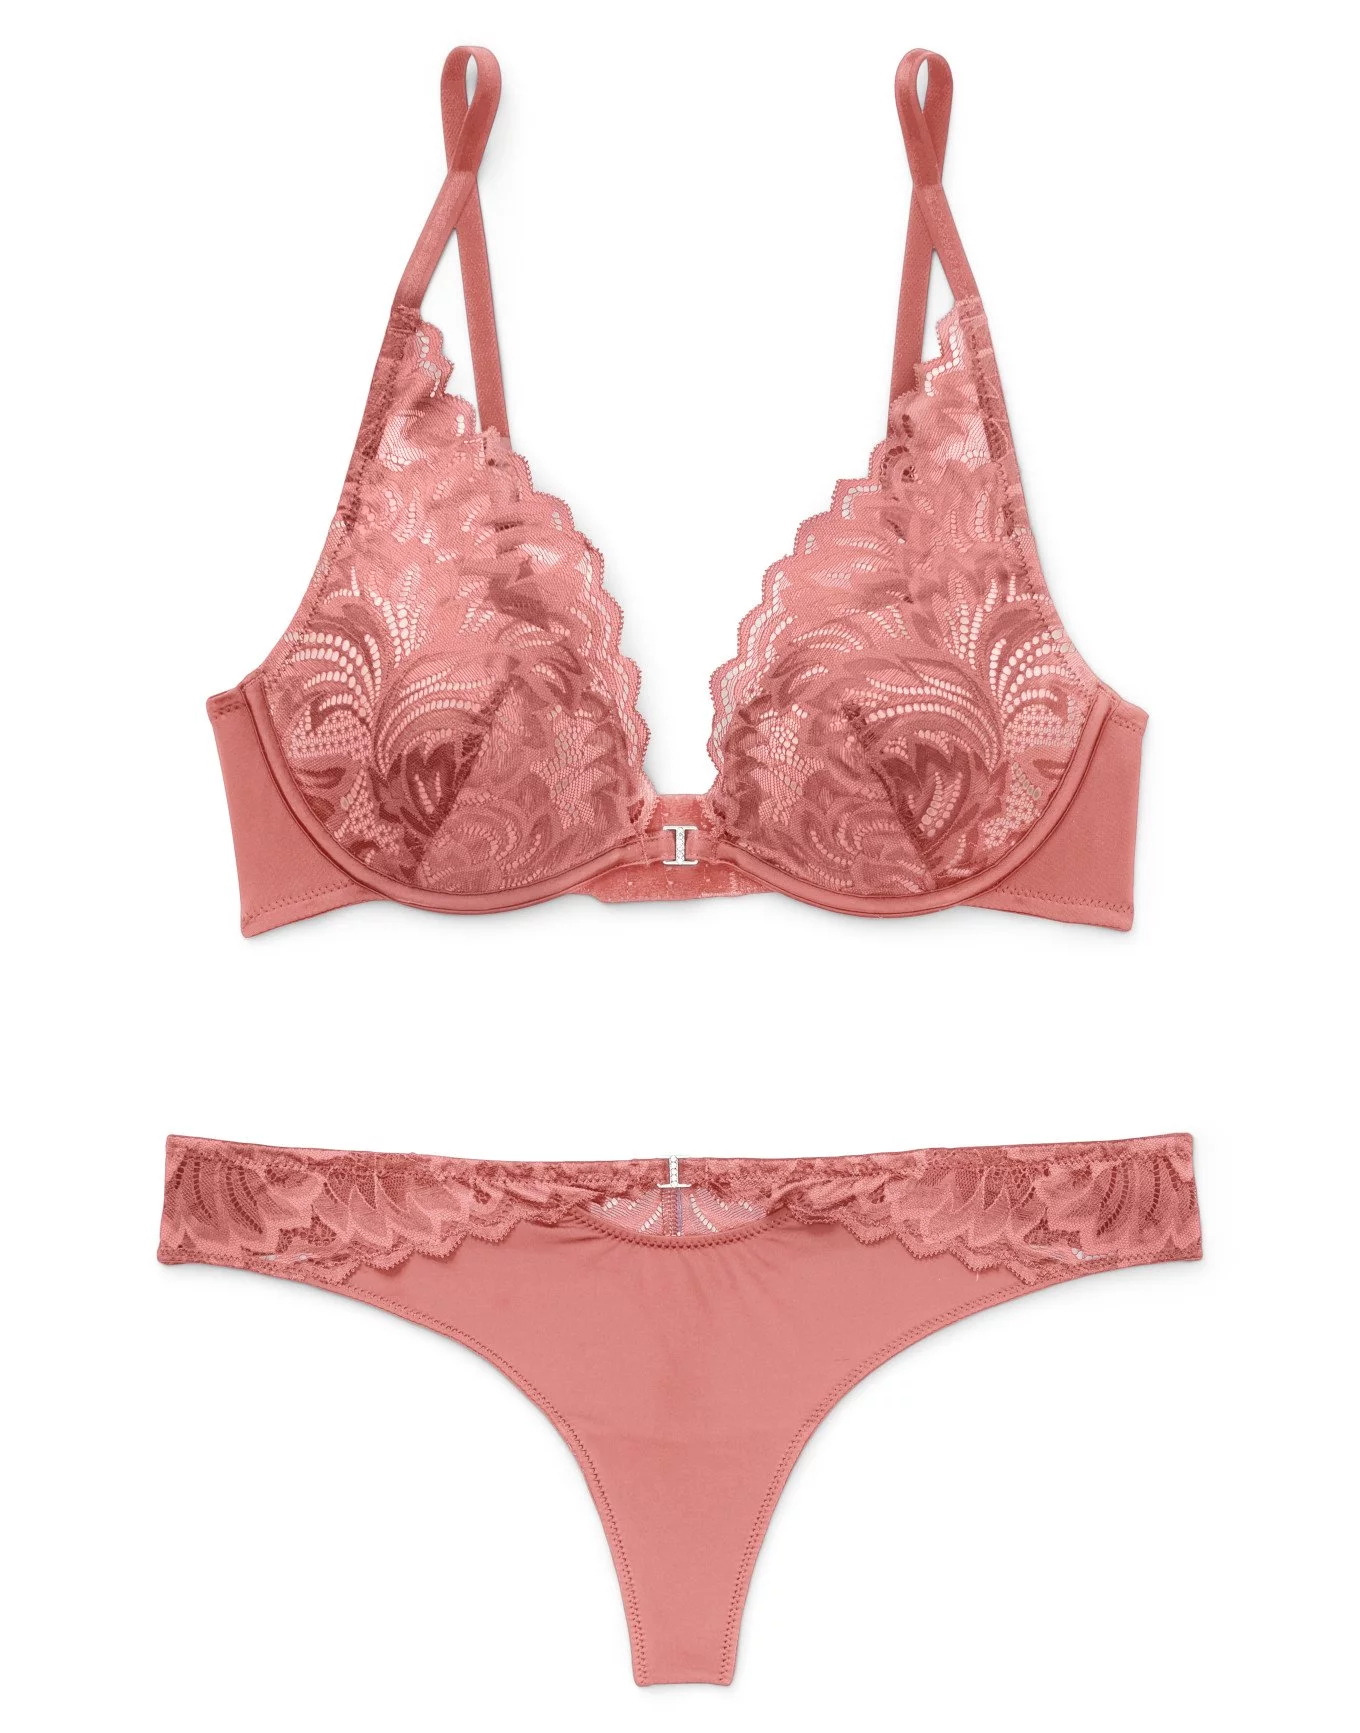 Dainty Enchantment Lace Trim Push-Up Bra and Panty Set in Pink